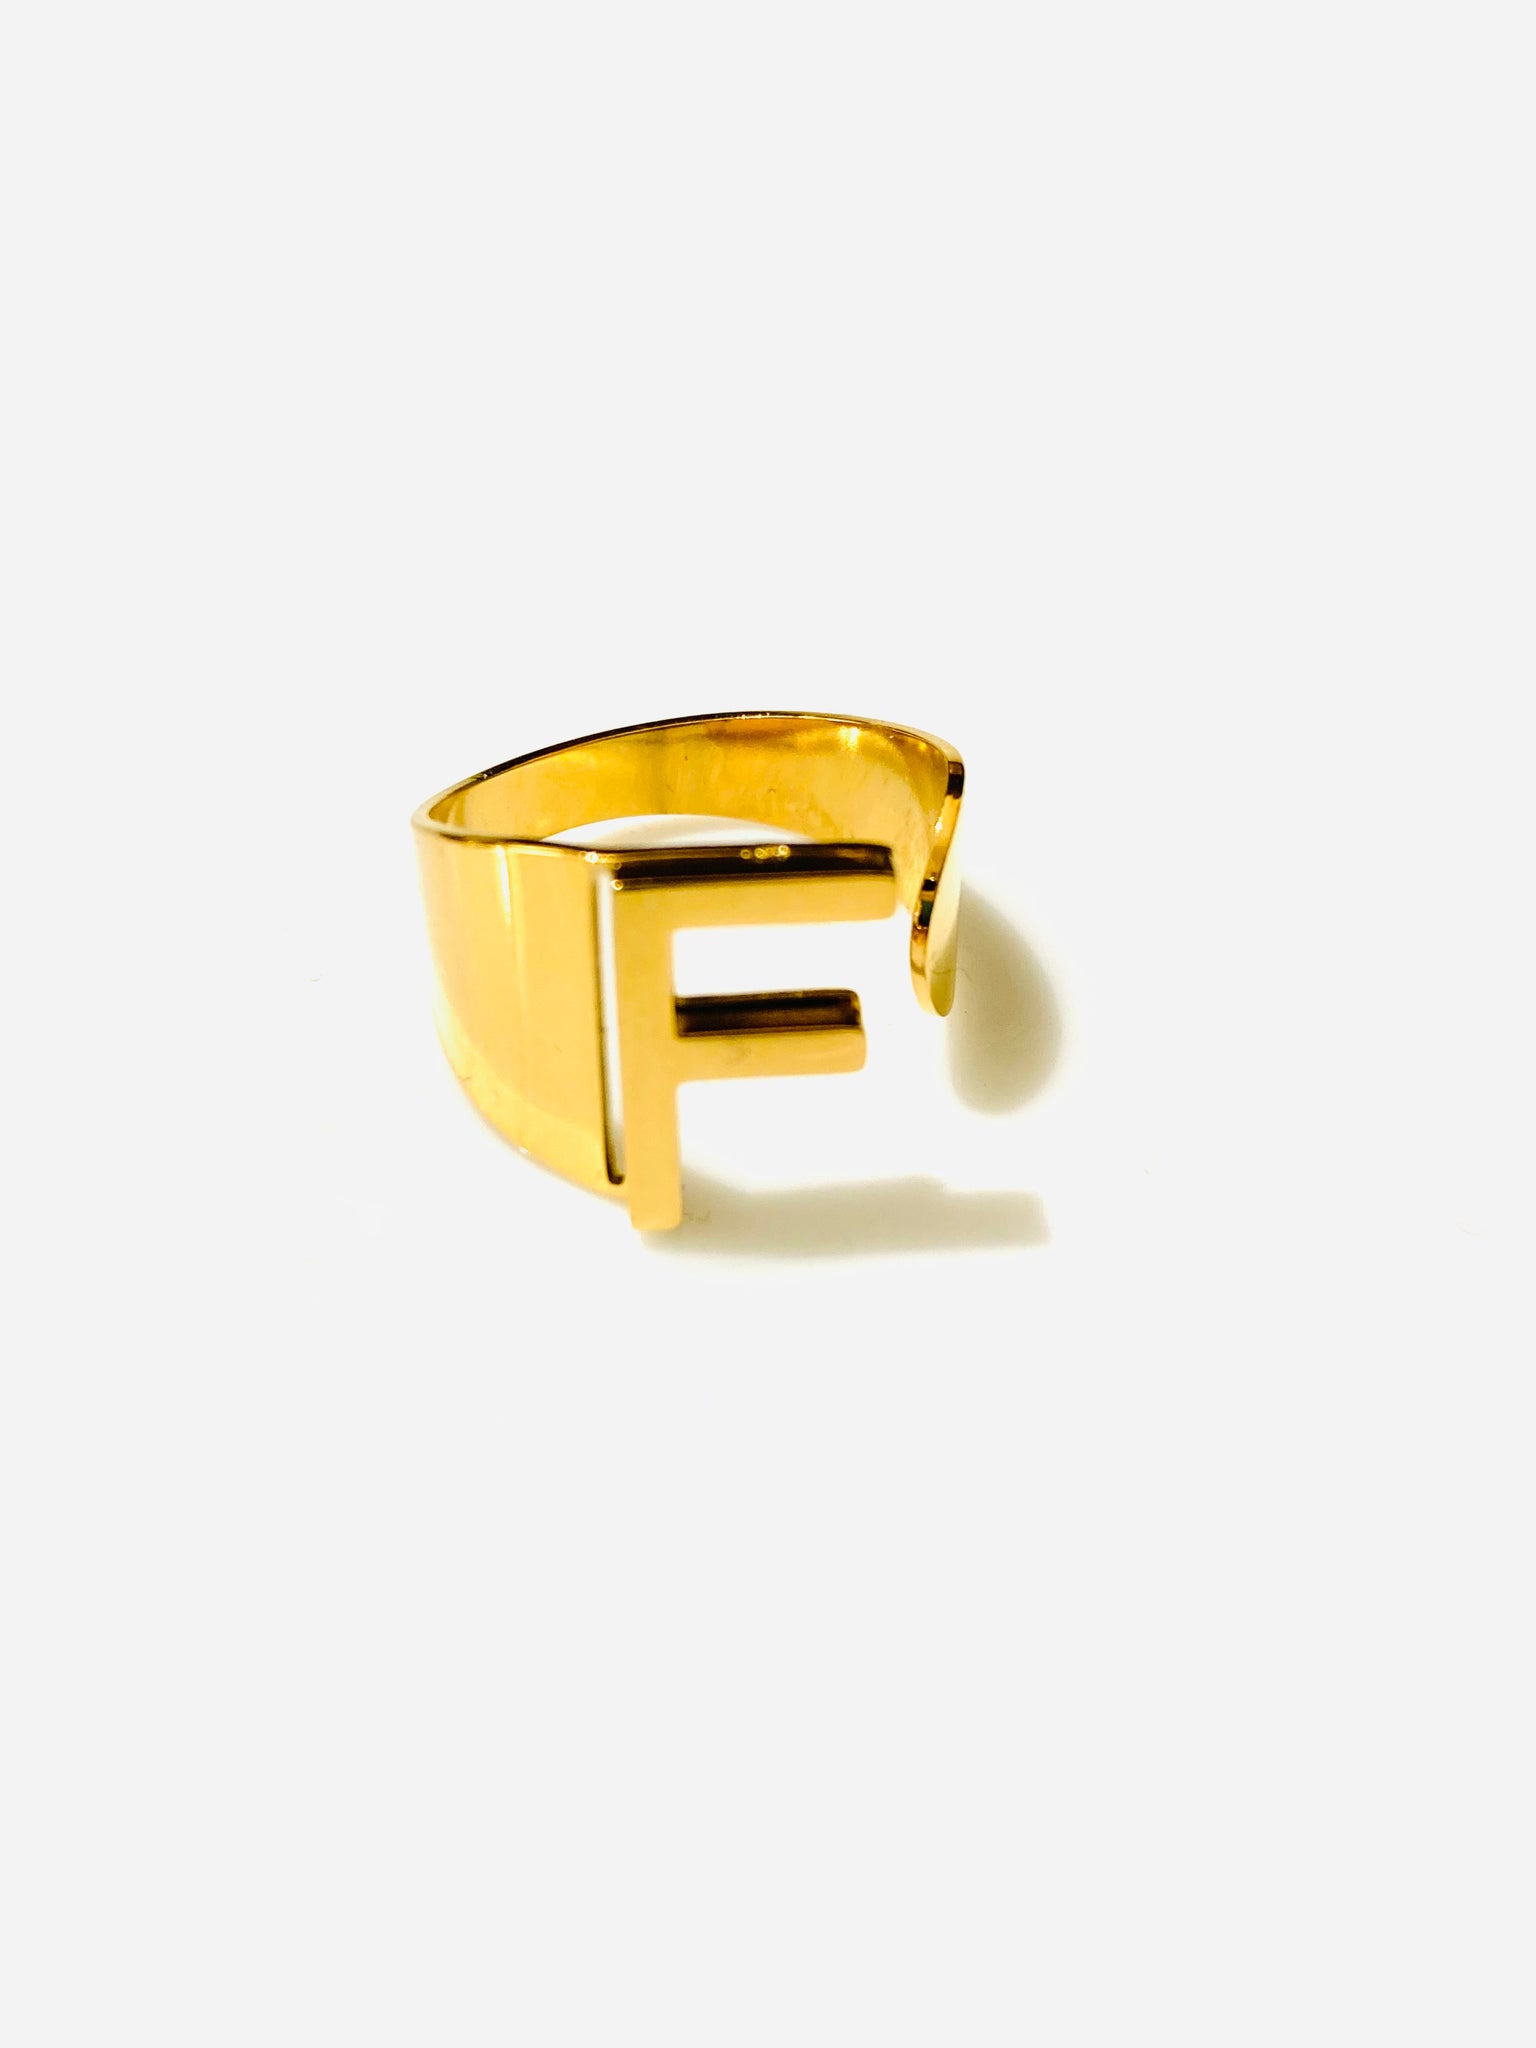 Buy Vighnaharta initial ''R'' Letter (CZ) Gold and Rhodium Plated Alloy Ring  for Women and Girls Online at Low Prices in India - Paytmmall.com